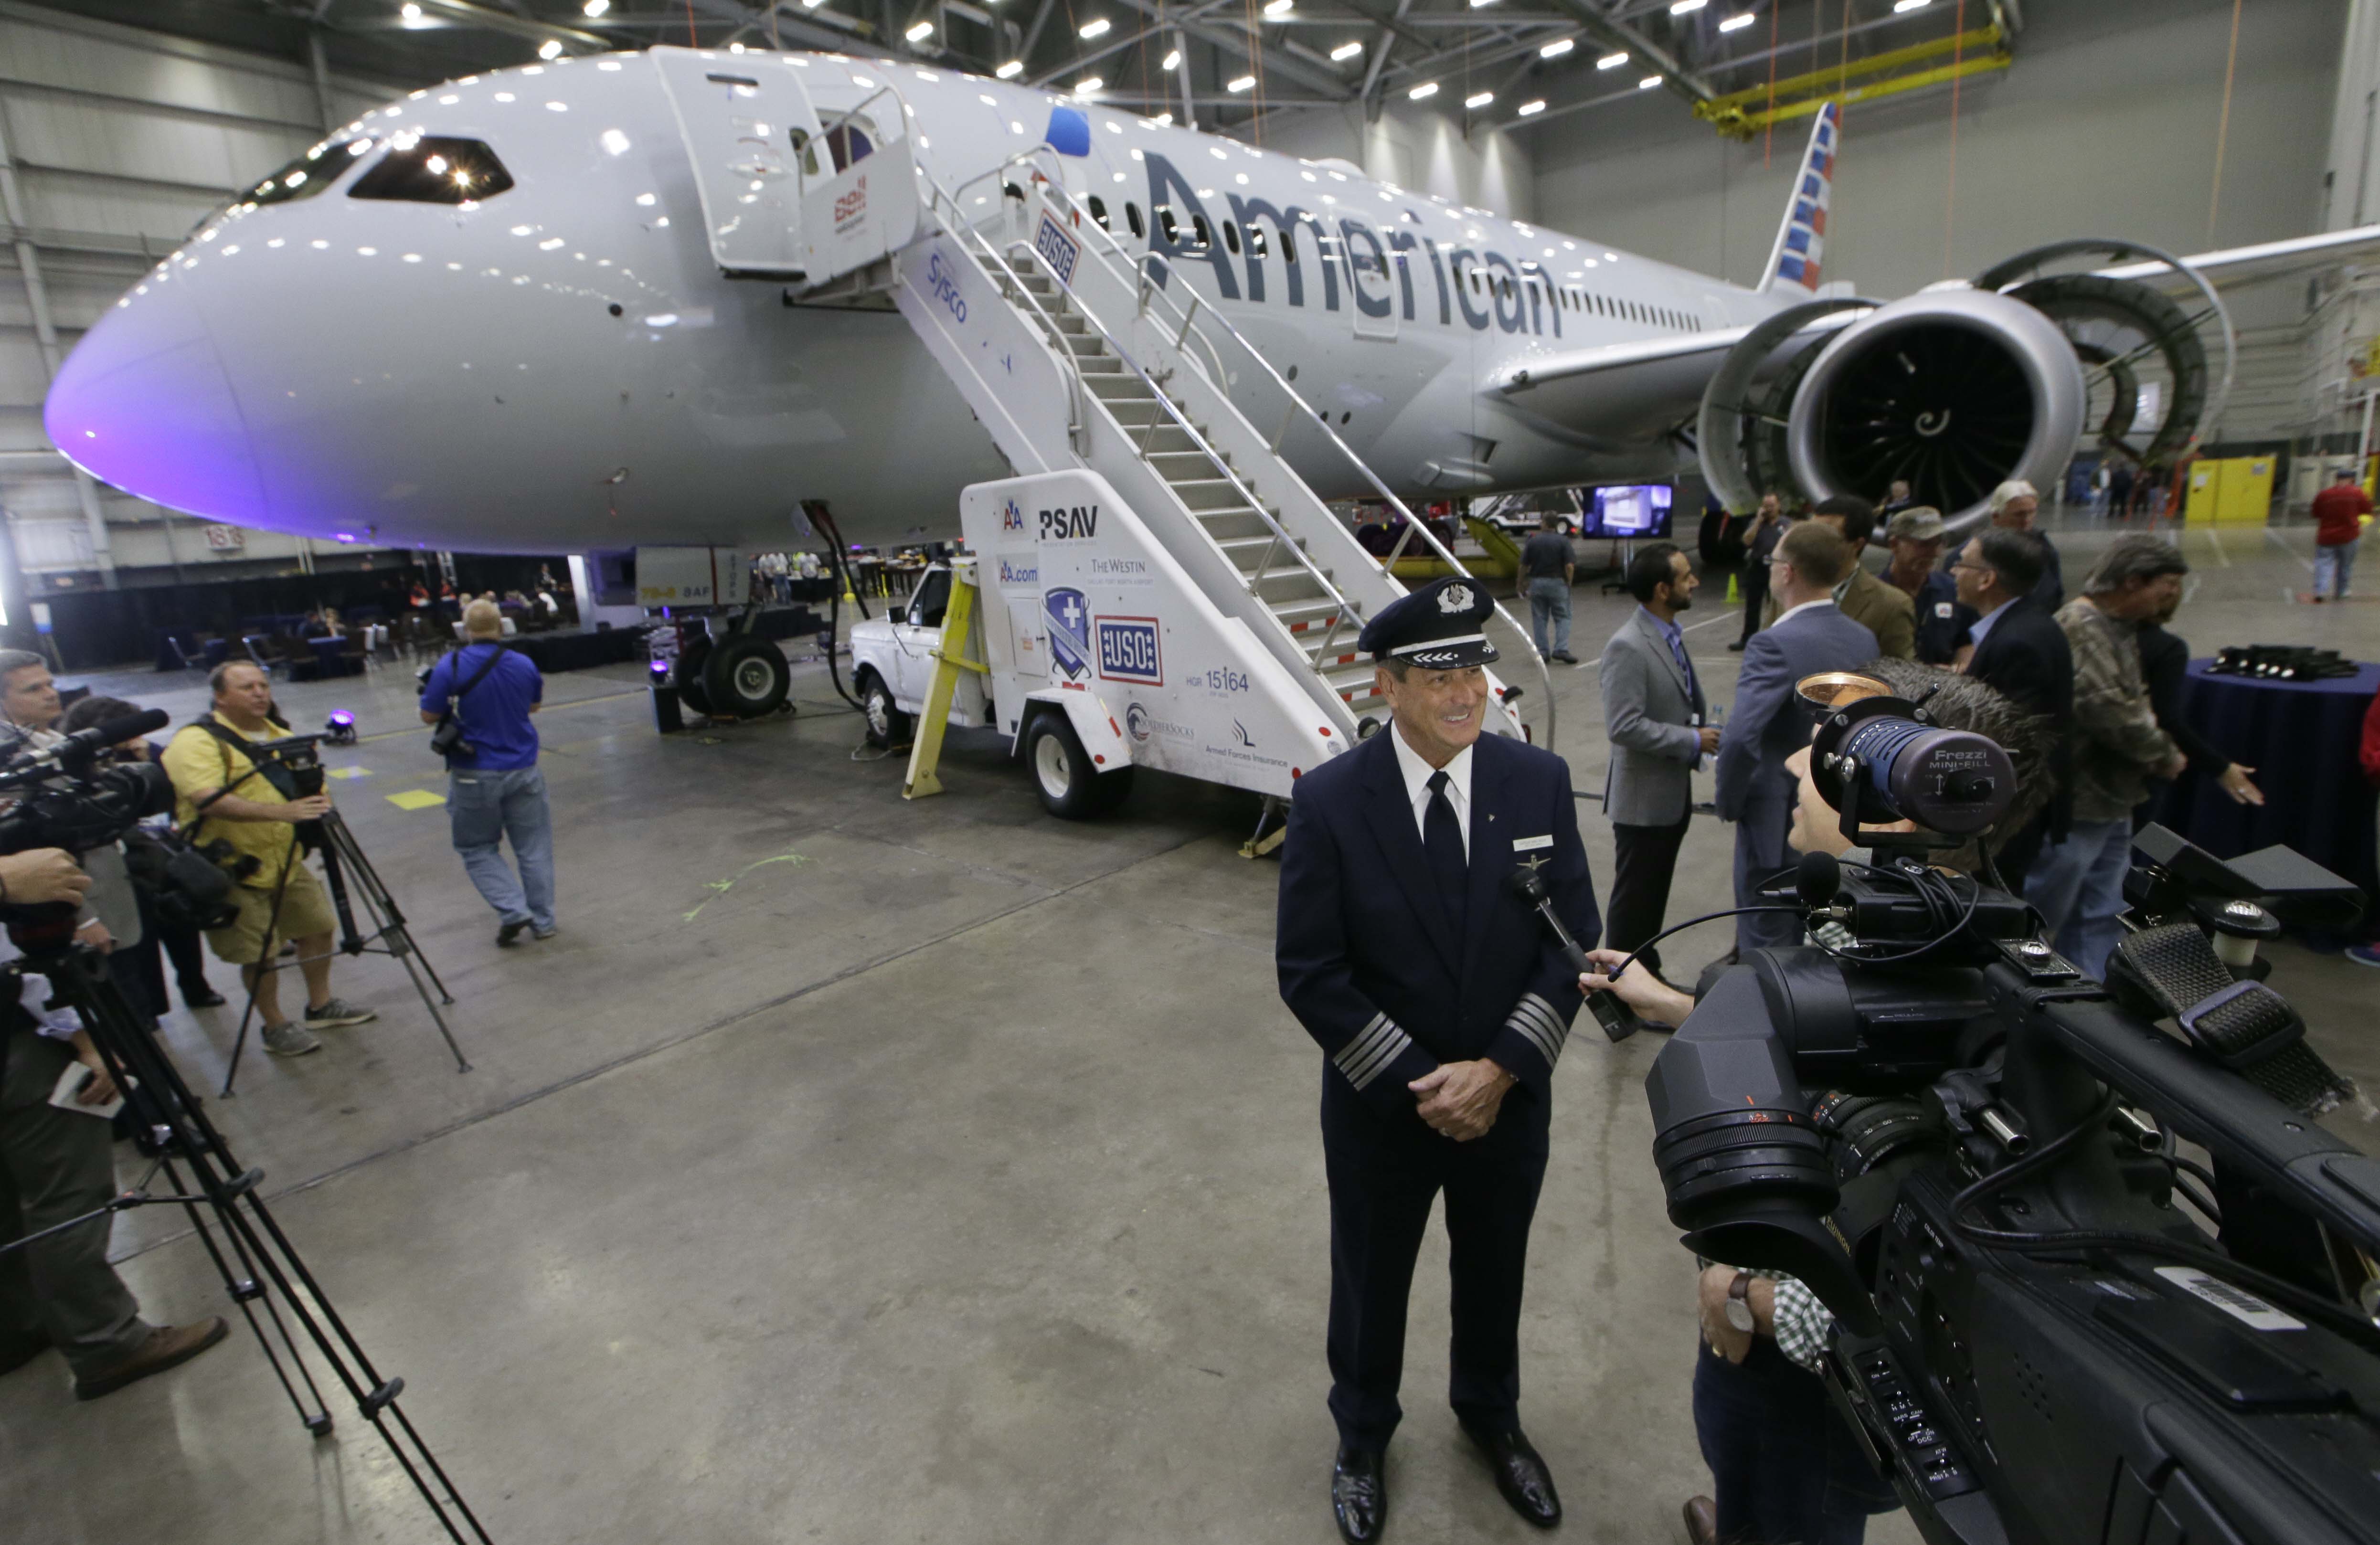 American Airlines takes delivery of its first Boeing 787 Dreamliner